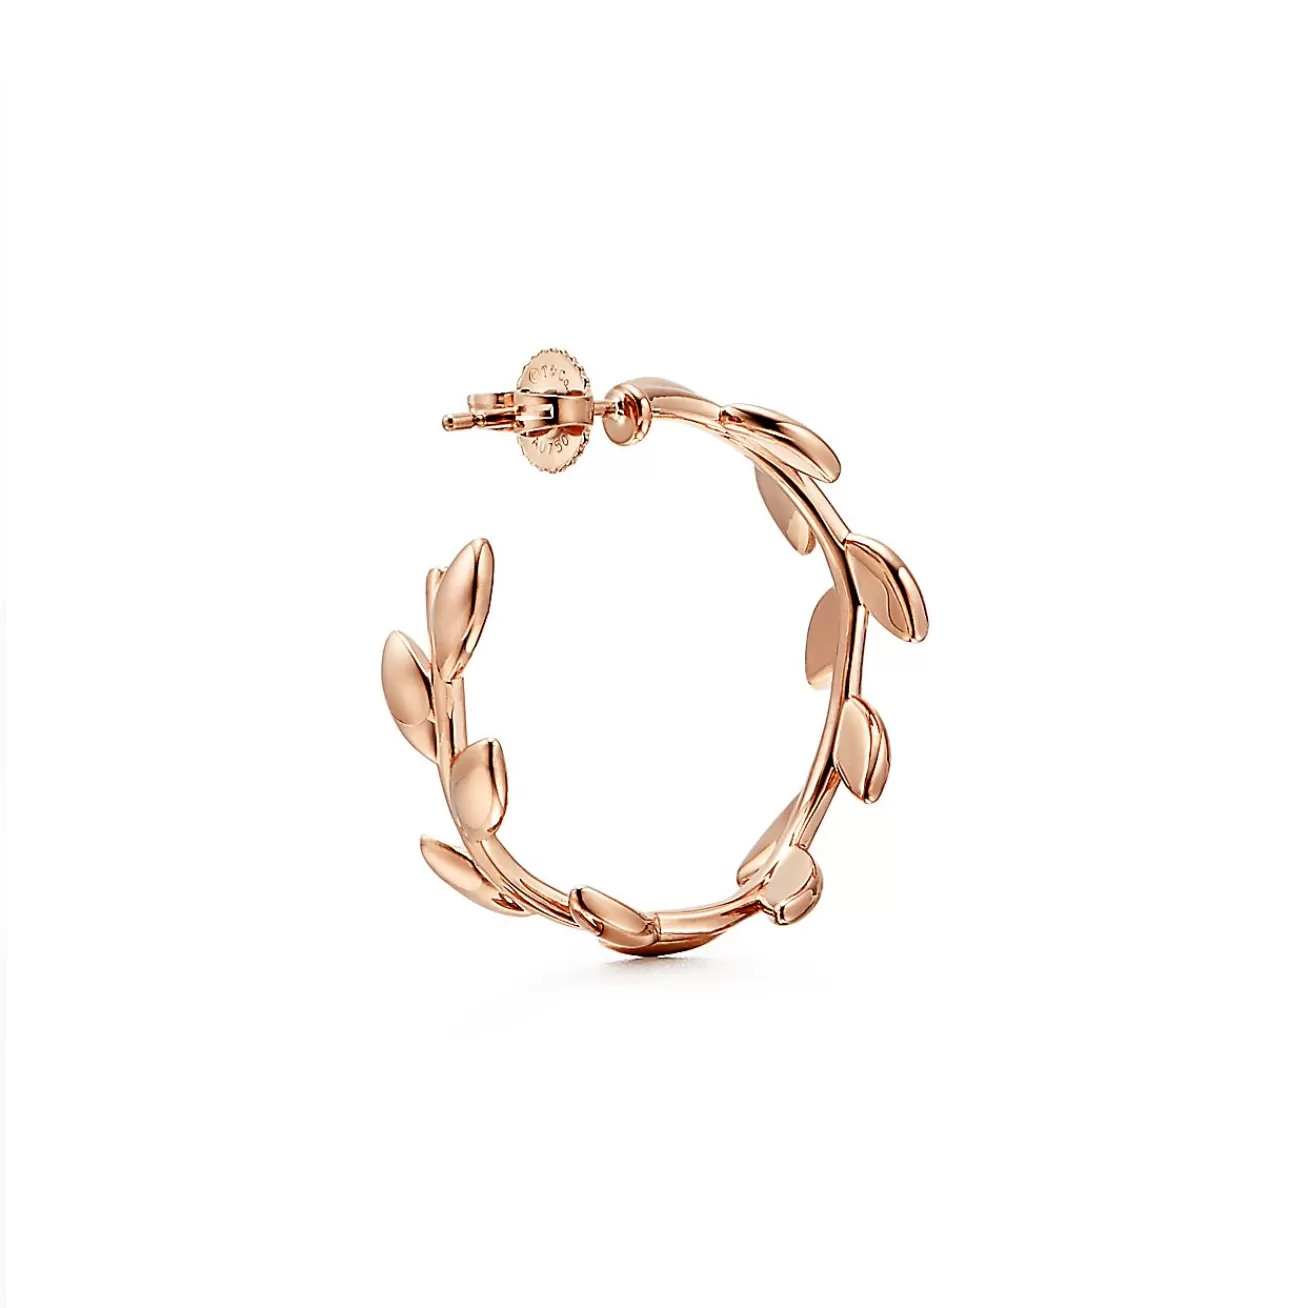 Tiffany & Co. Paloma Picasso® Olive Leaf hoop earrings in 18k rose gold. | ^ Earrings | Hoop Earrings